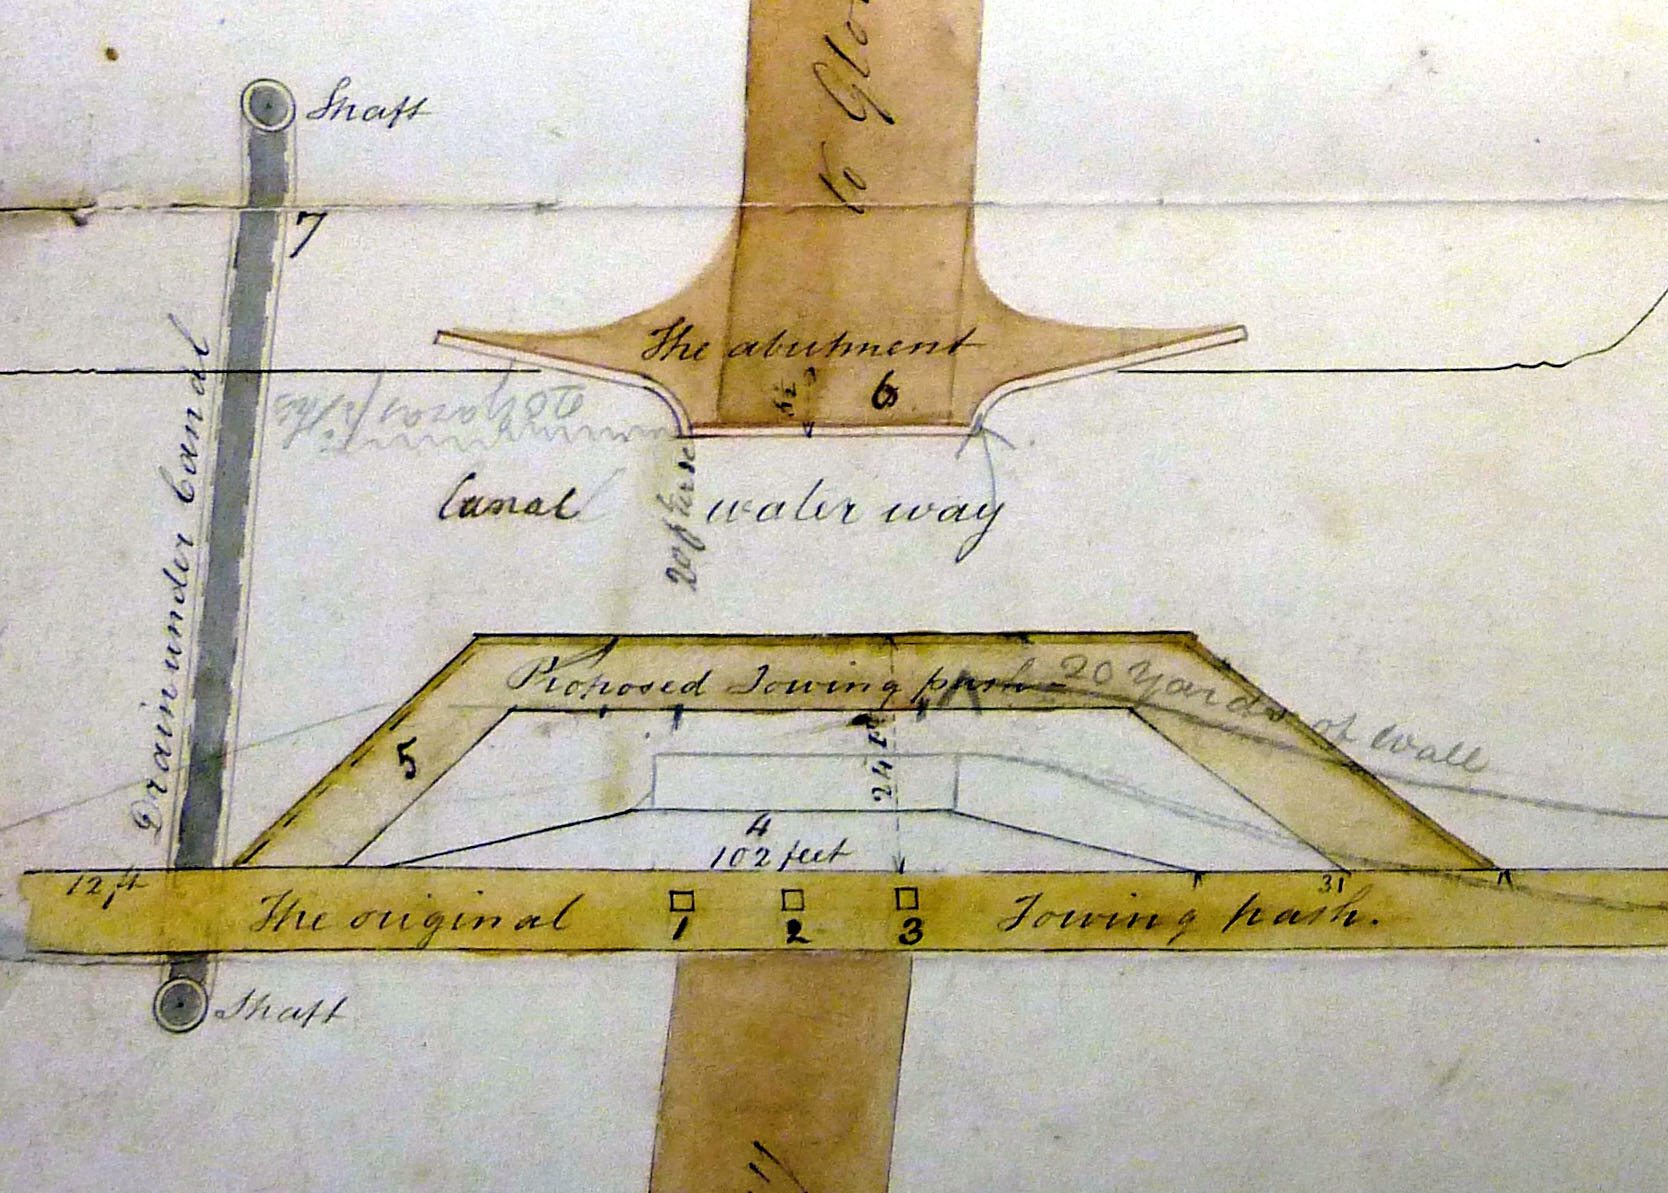 Plan of the proposed alteration to the towpath, also showing the drain, 1842. (GA D1180/10/144)